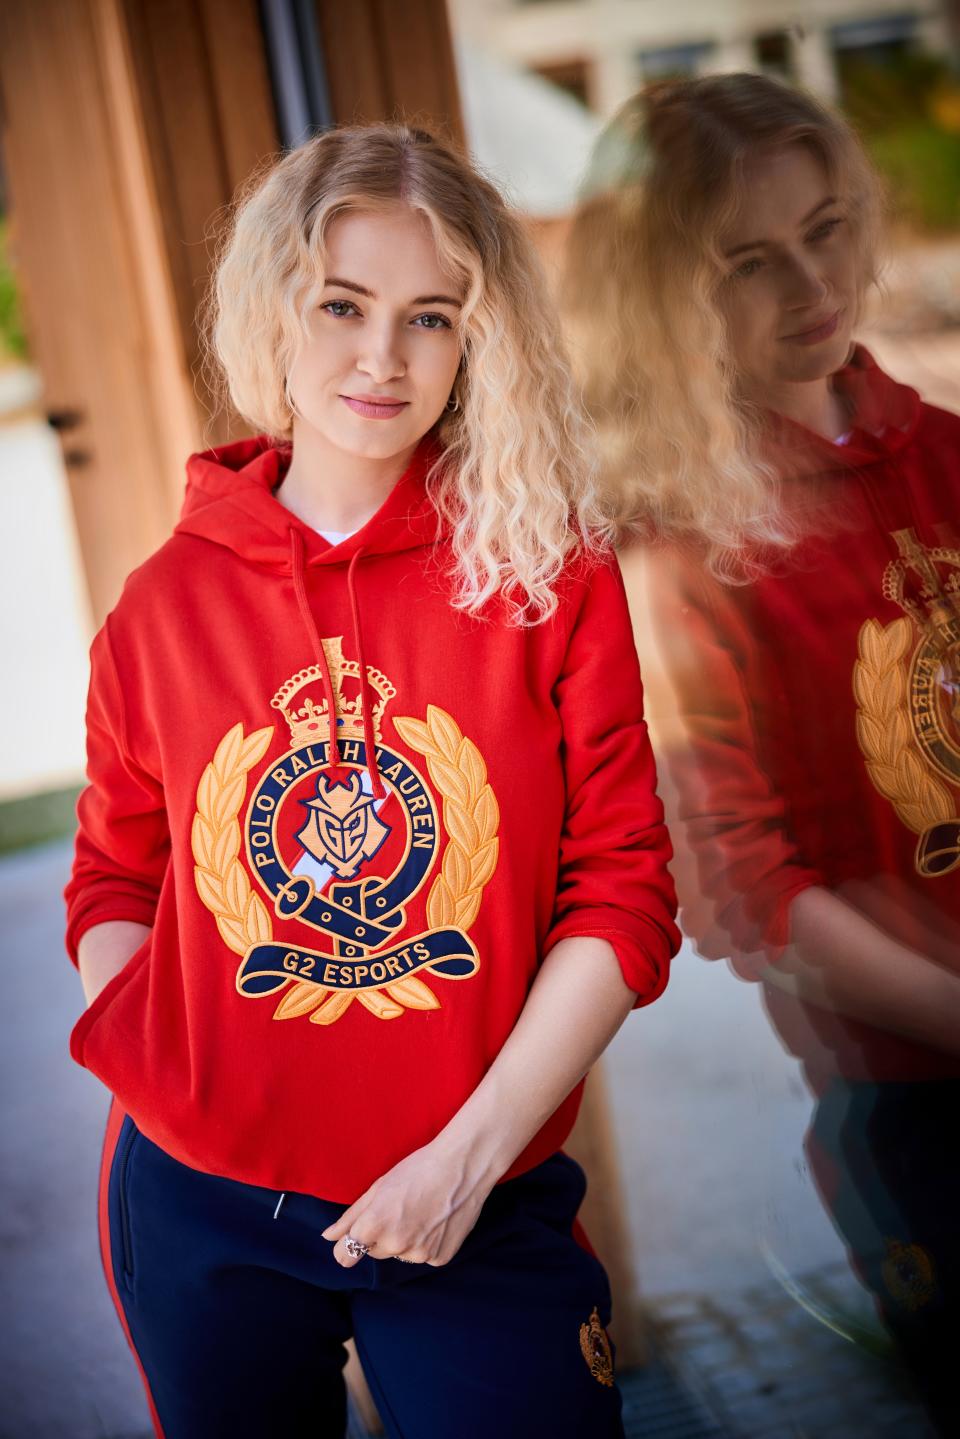 Ralph Lauren and G2 Esports team on fashion collection